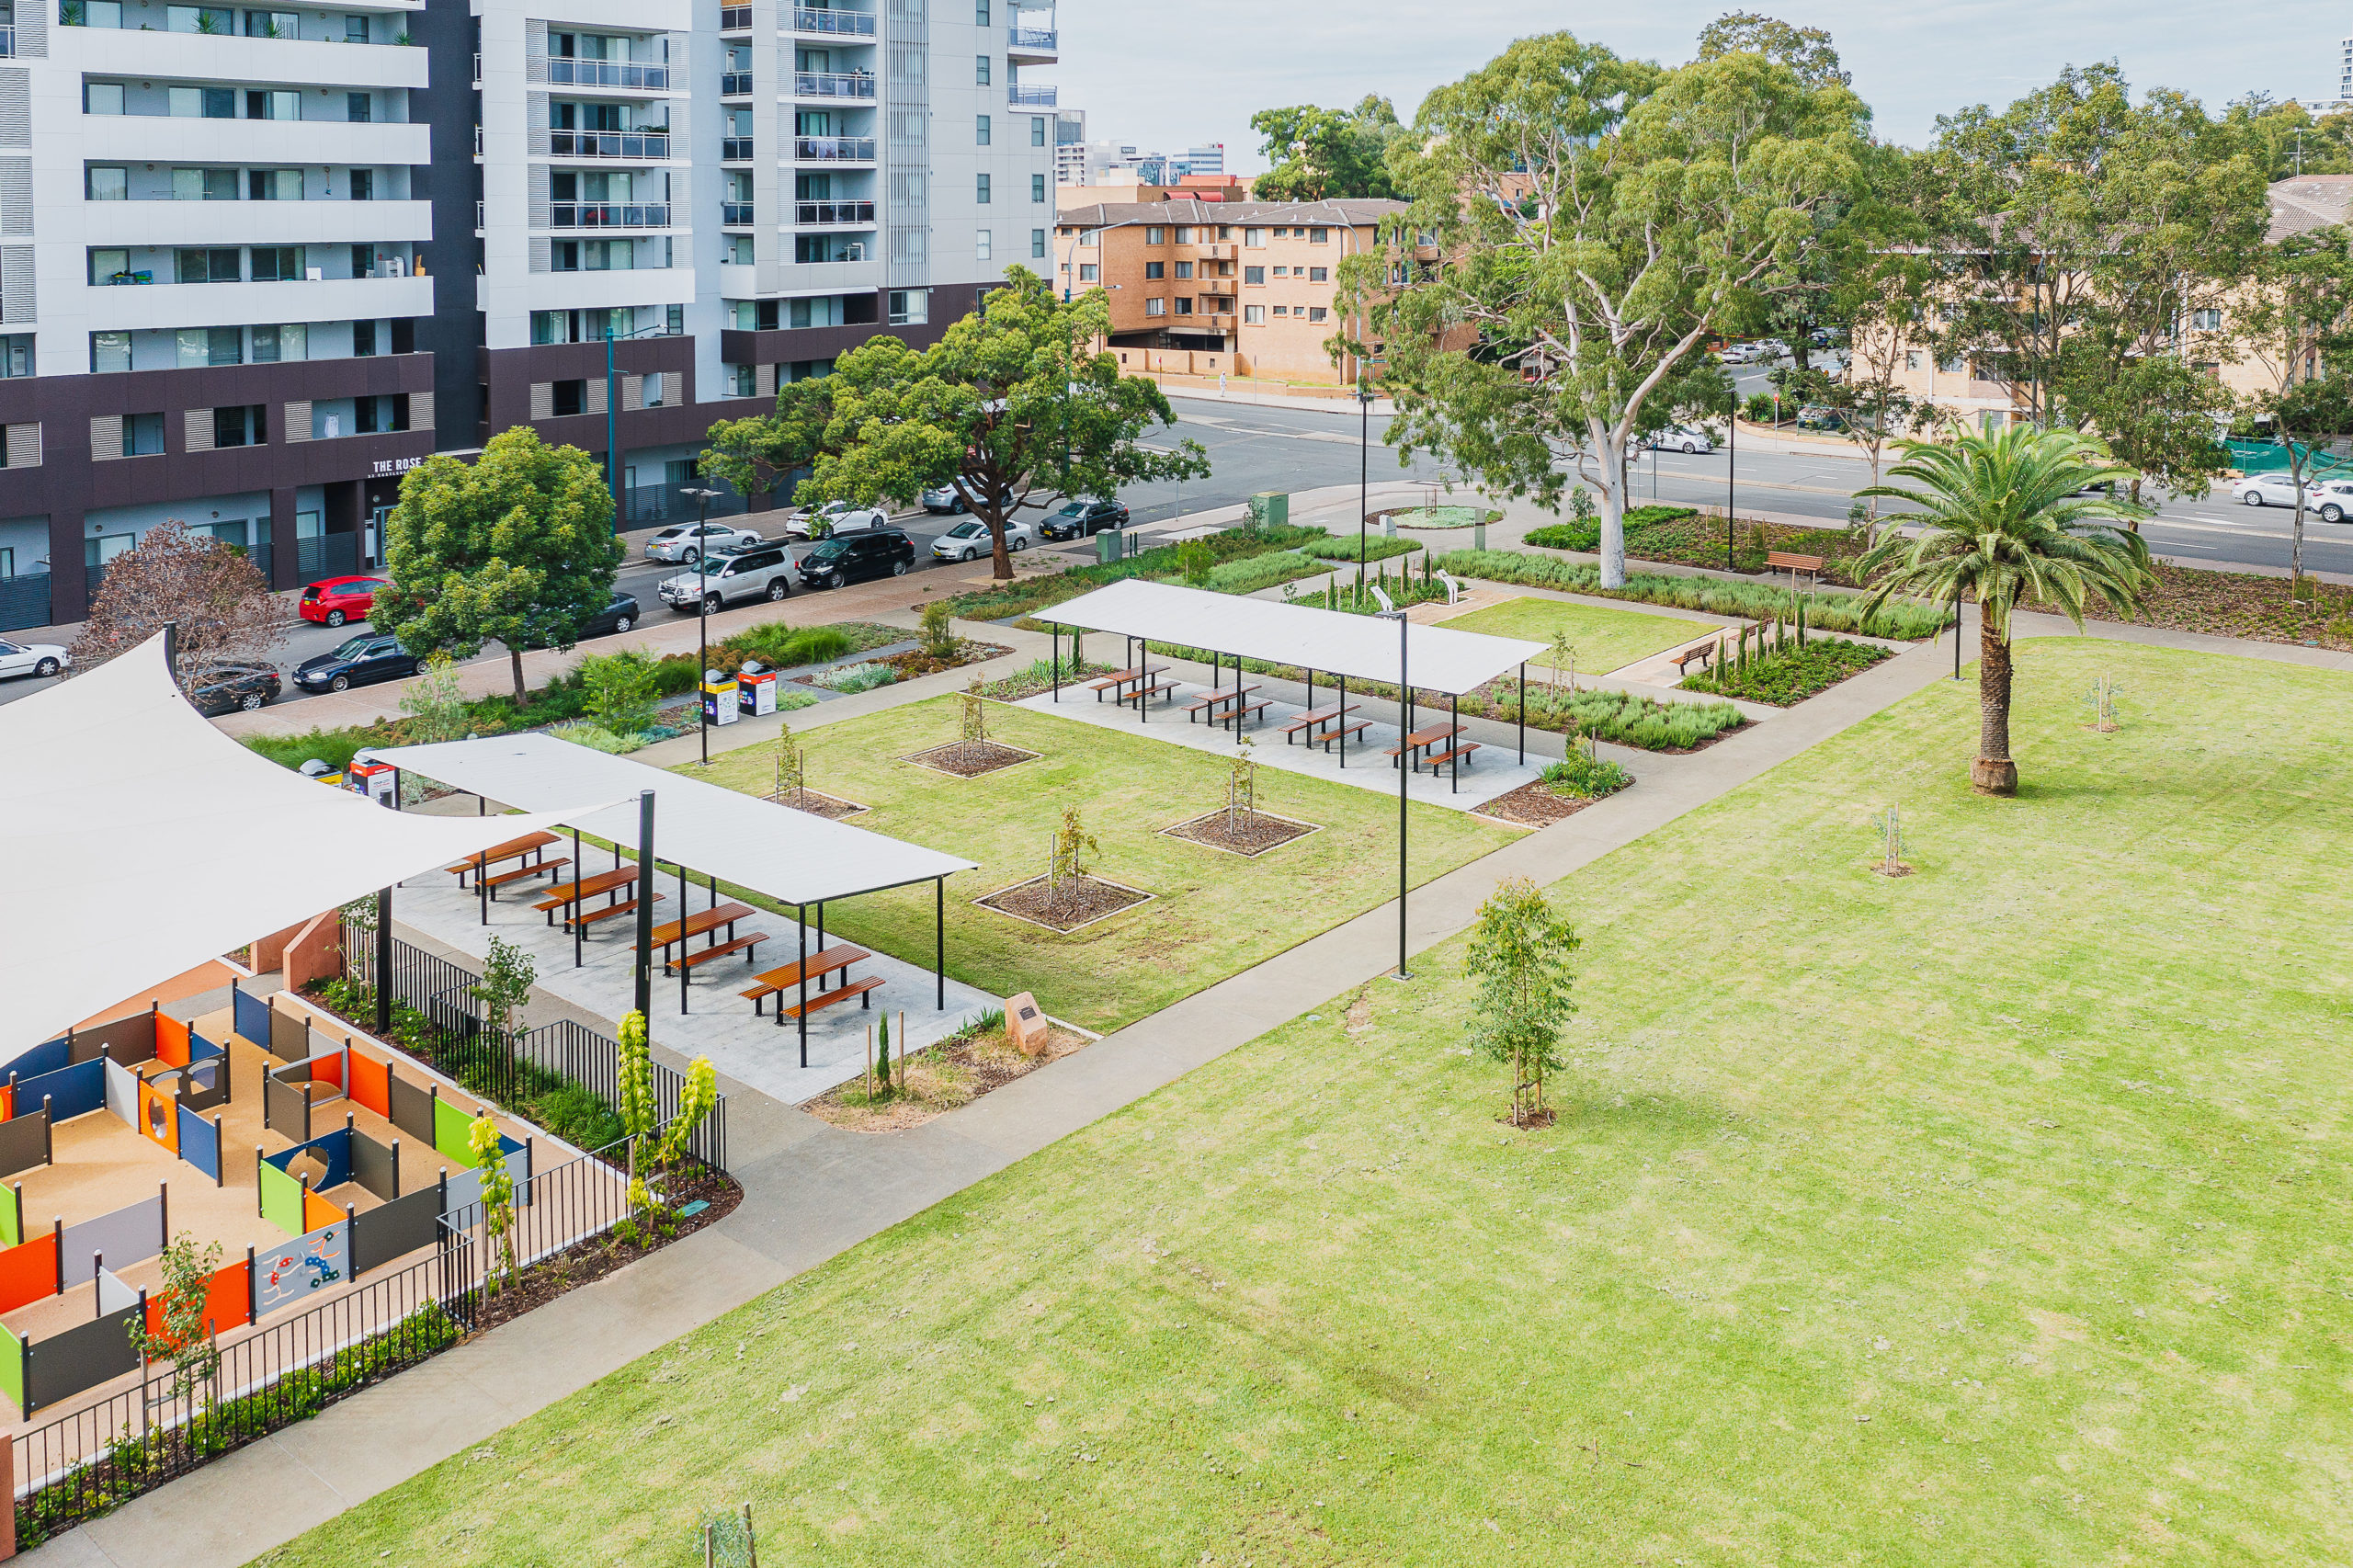 Why Parks are Essential for Urban Living